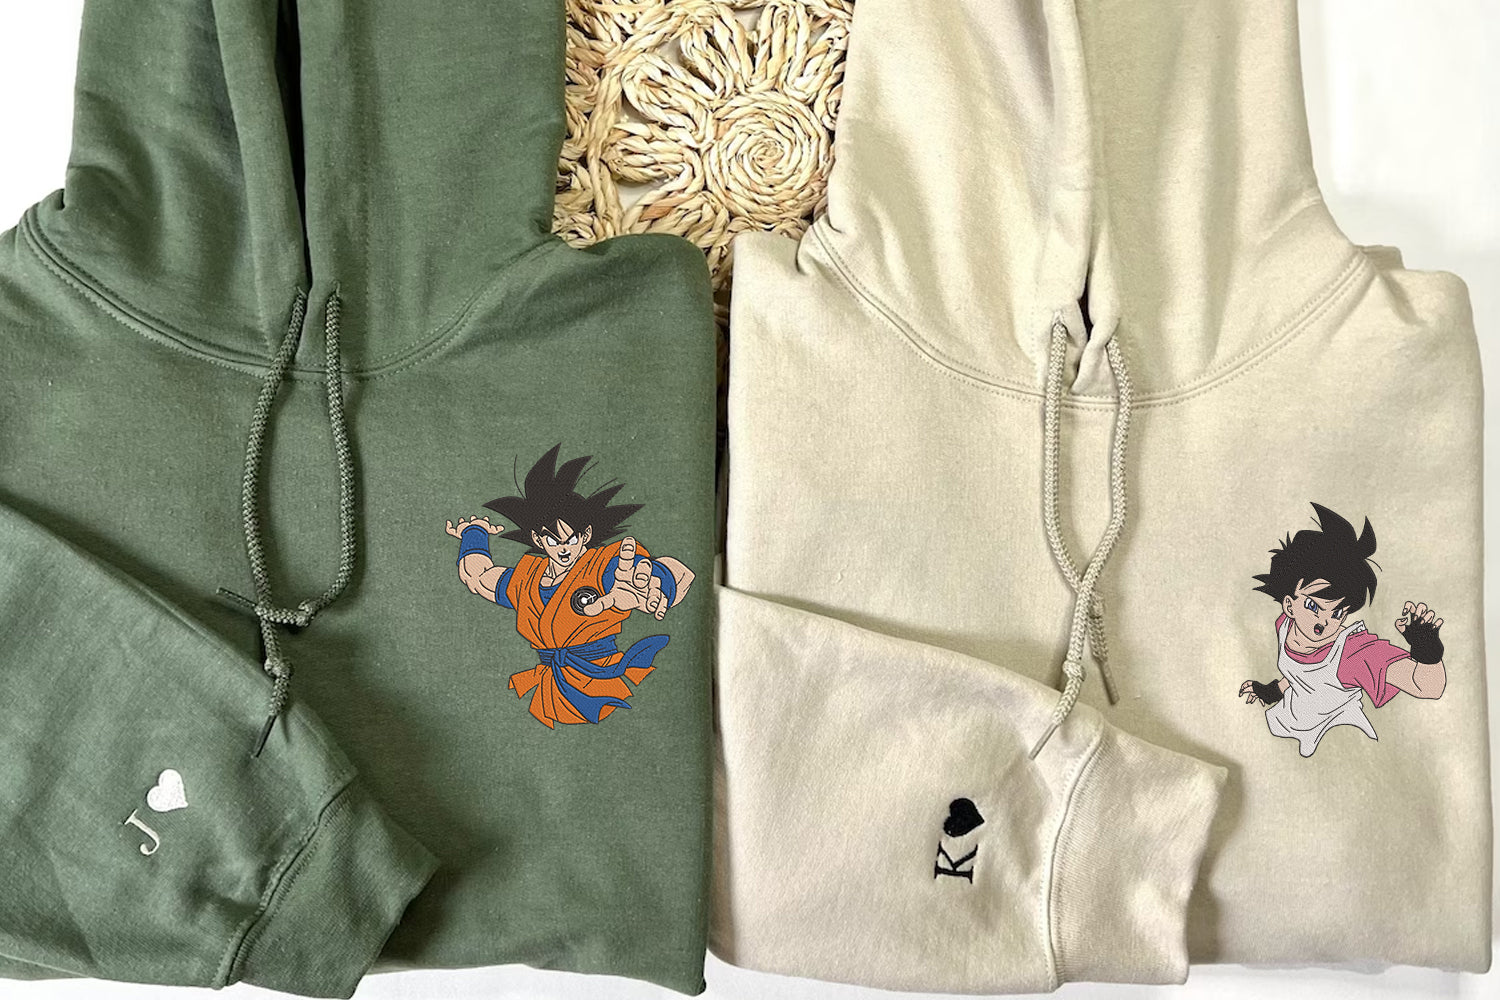 Custom Embroidered Hoodies For Couples, Cute Cartoon Goku x Videl Couples Embroidered Hoodie